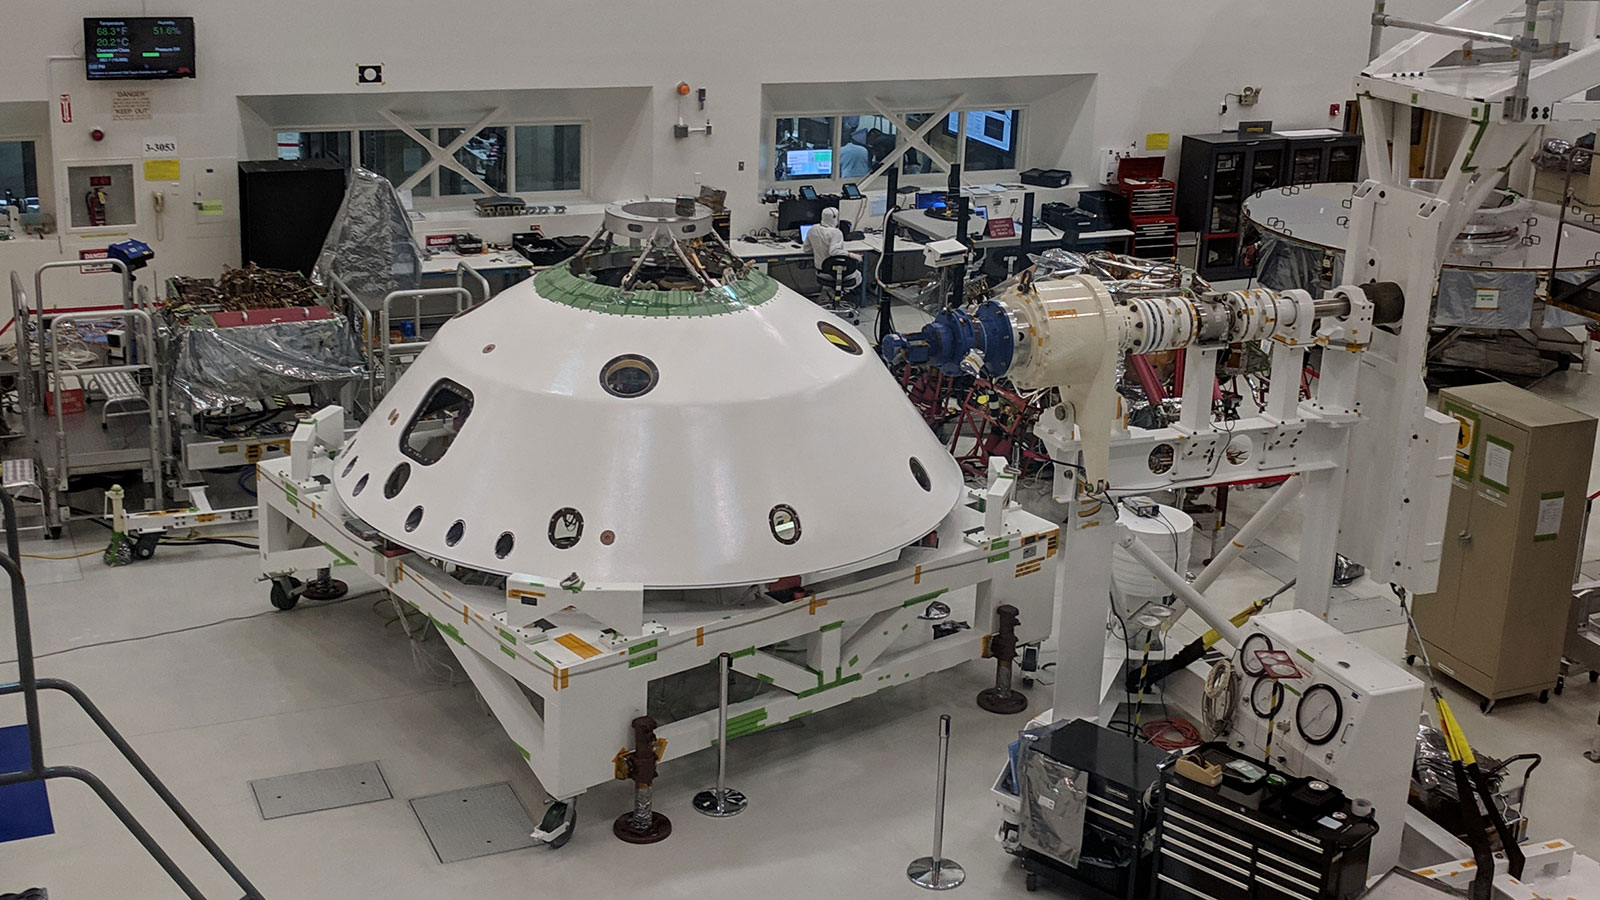 The backshell that will help protect the Mars 2020 rover during its descent into the Martian atmosphere visible in the foreground. A technician on the project monitors the progress of Systems Test 1.